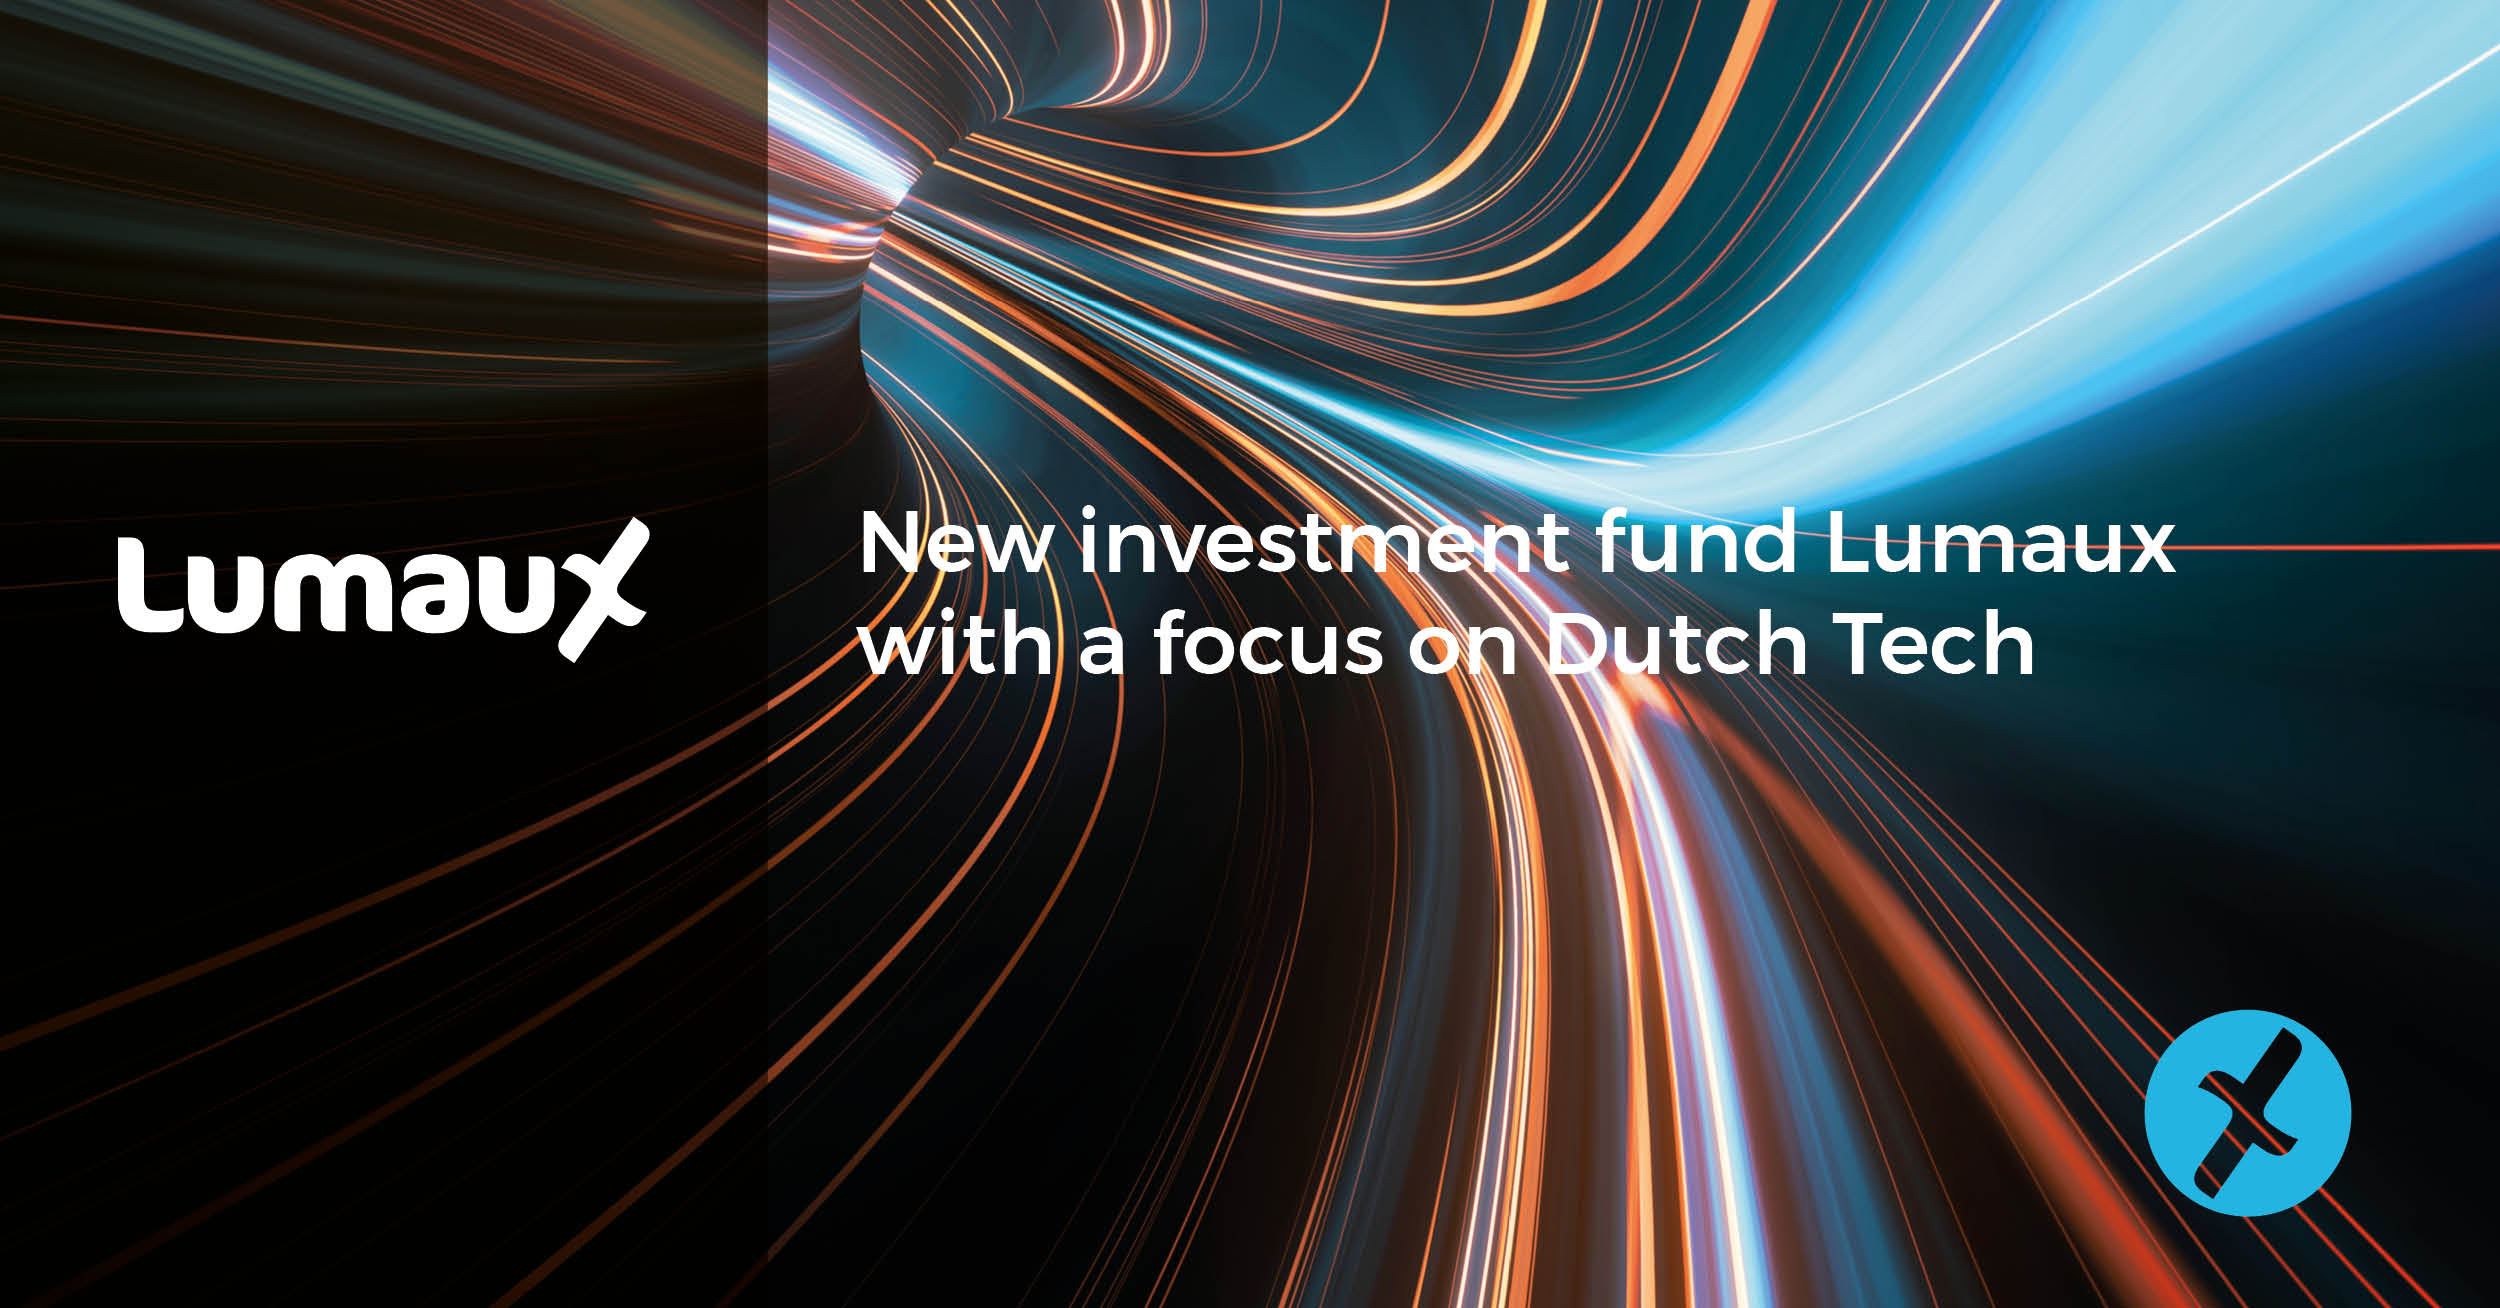 New investment fund Lumaux with a focus on Dutch Tech